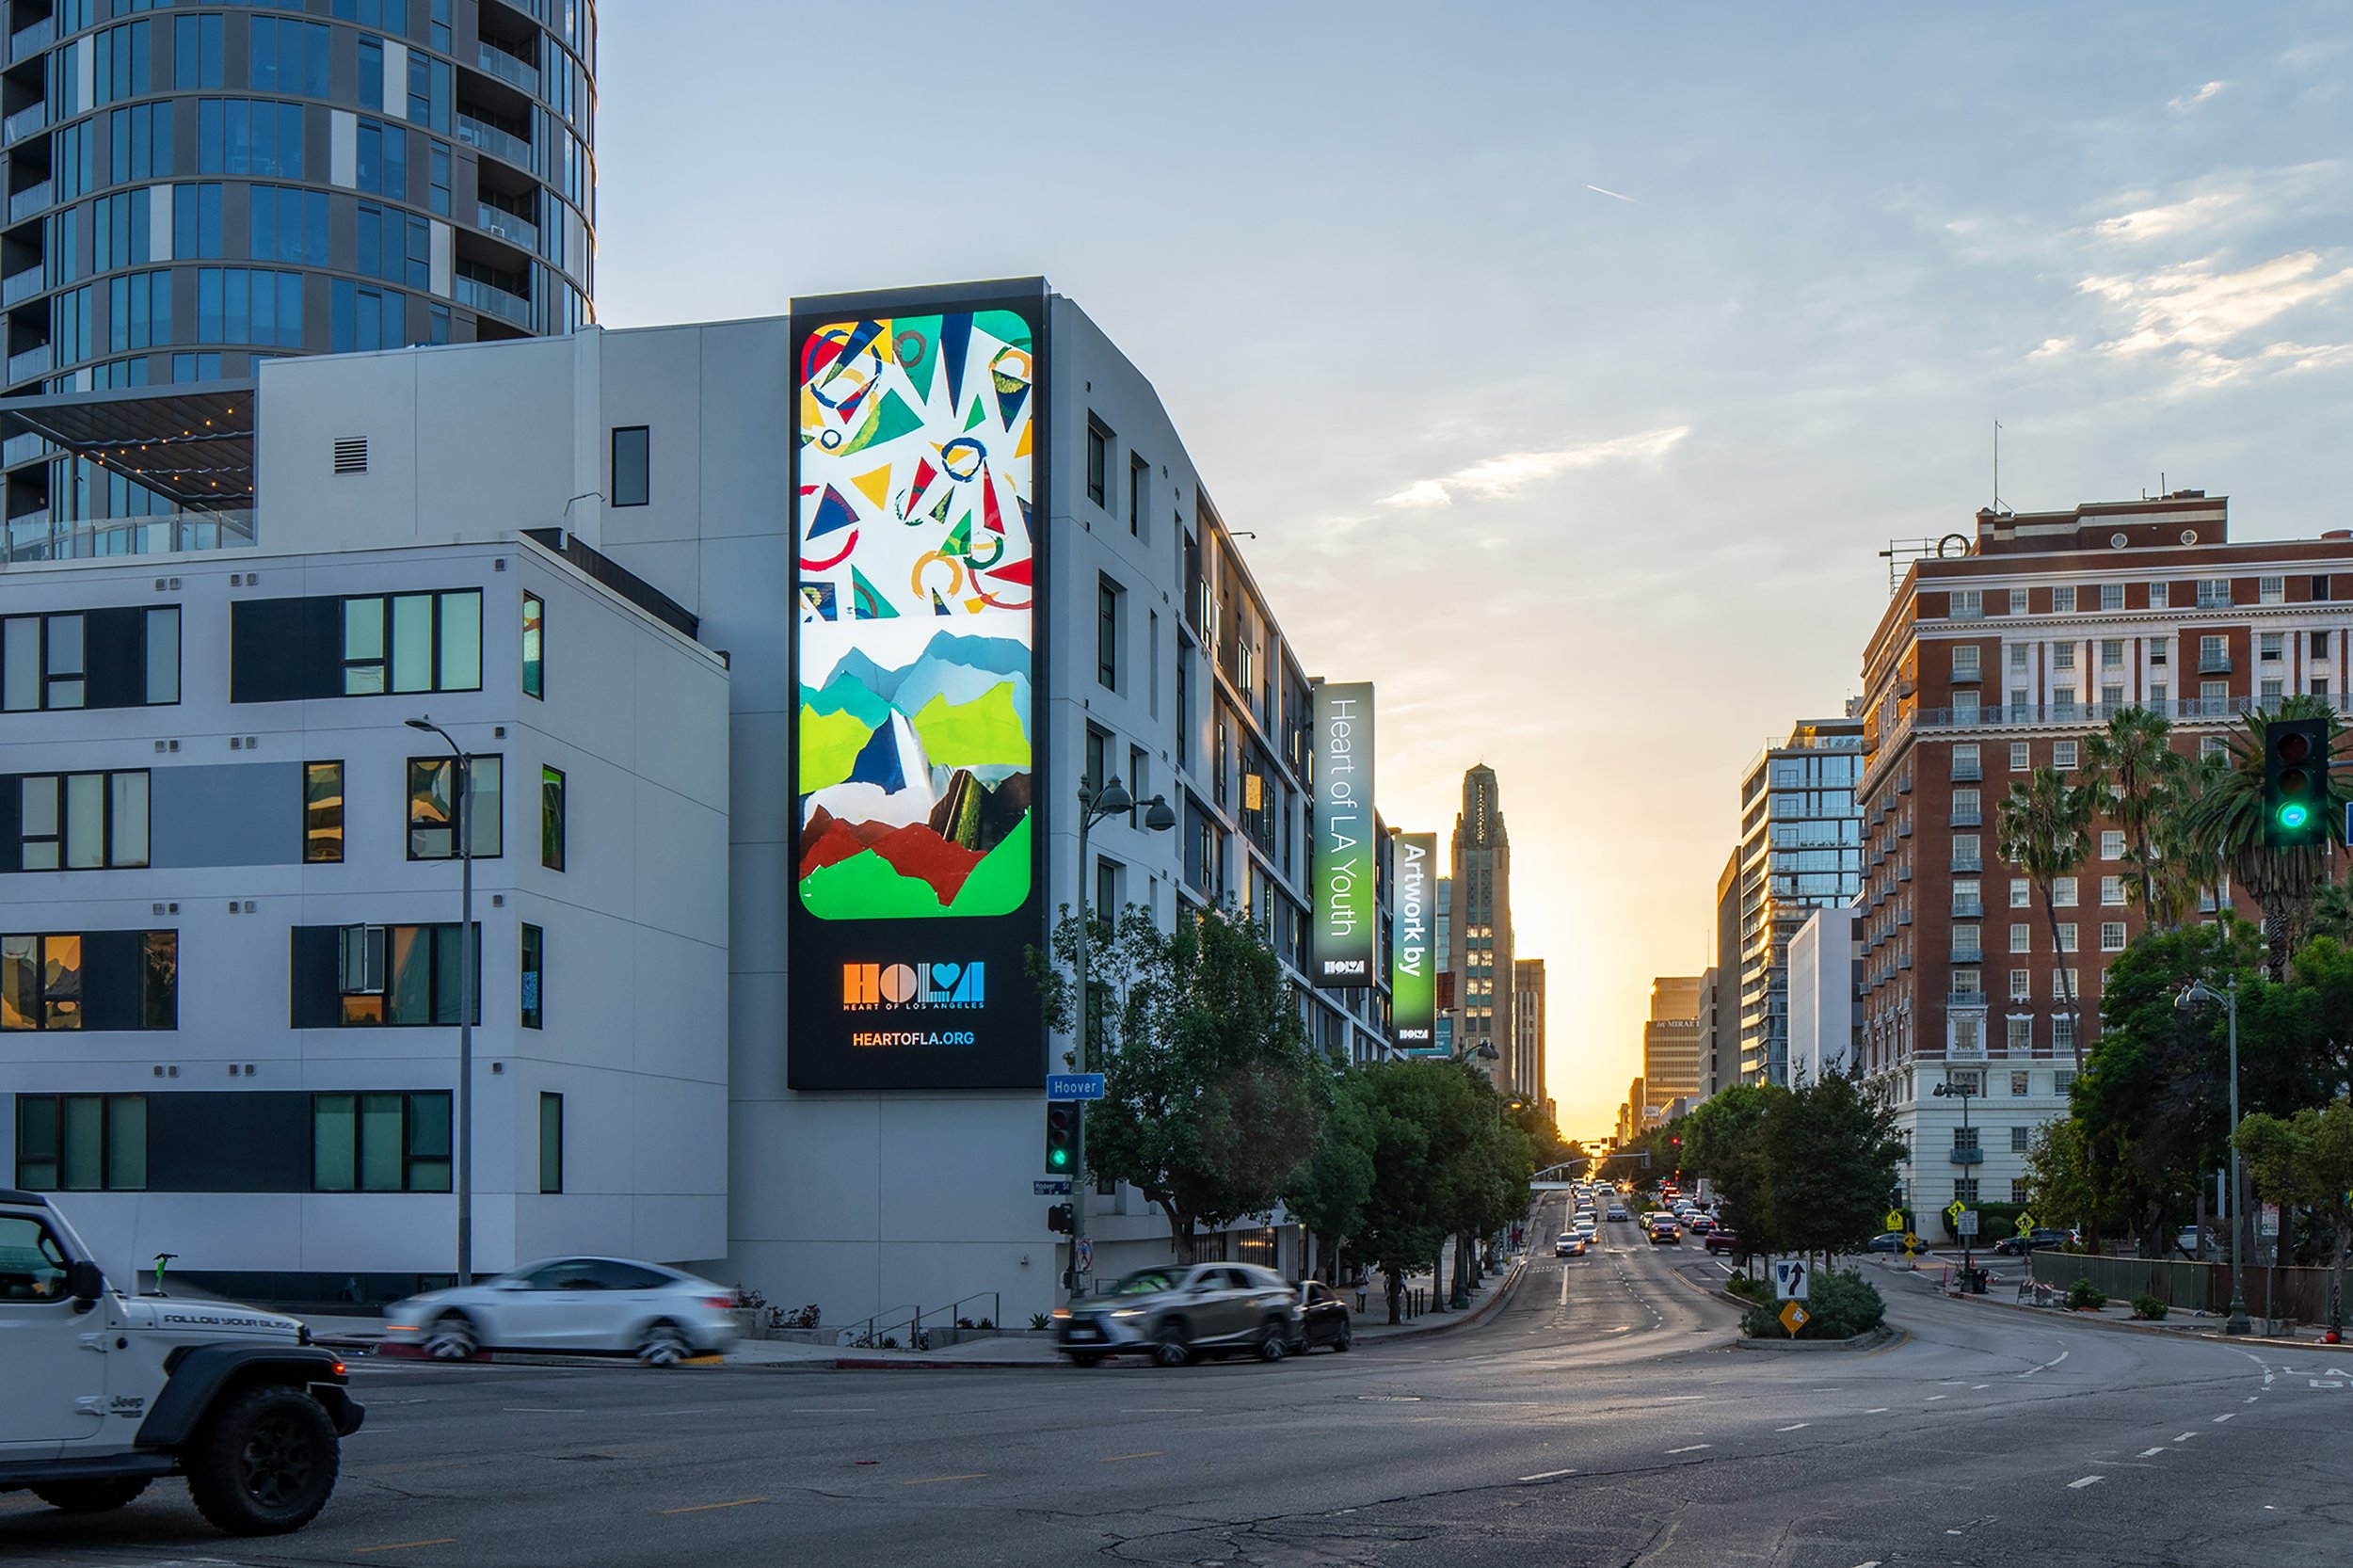 StandardVision Partners with HOLA to Feature Special Youth Artwork Program  on Large LED Displays in Los Angeles — StandardVision